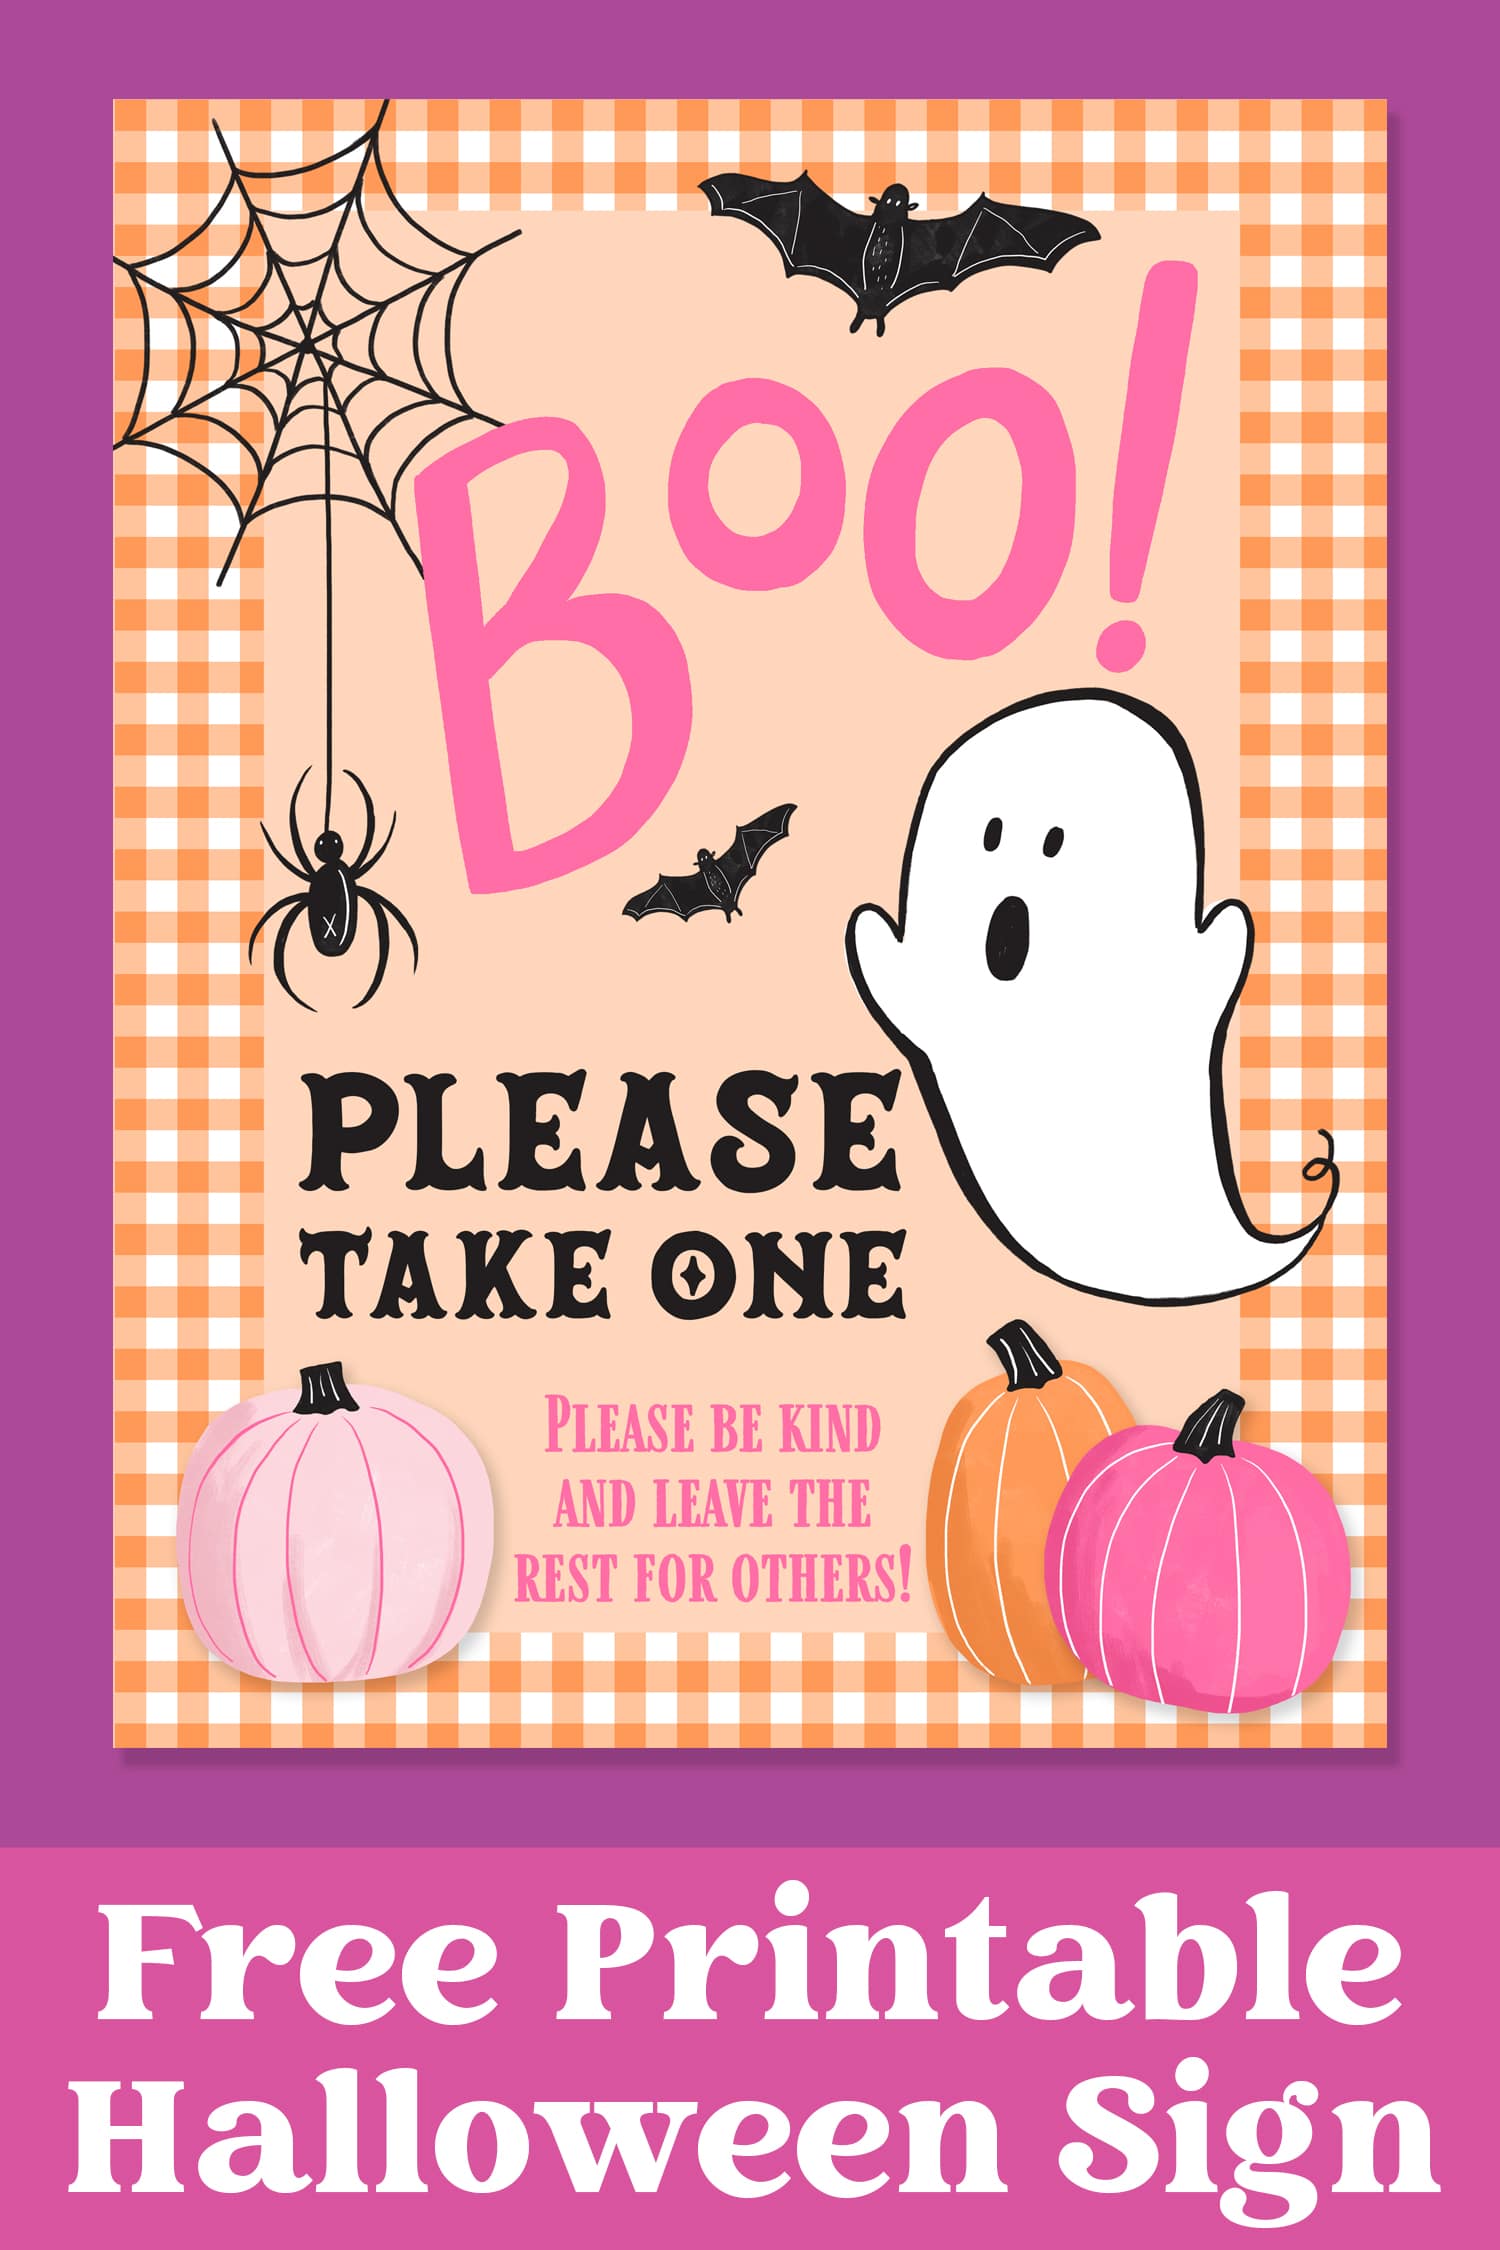 free printable halloween sign for candy bowl